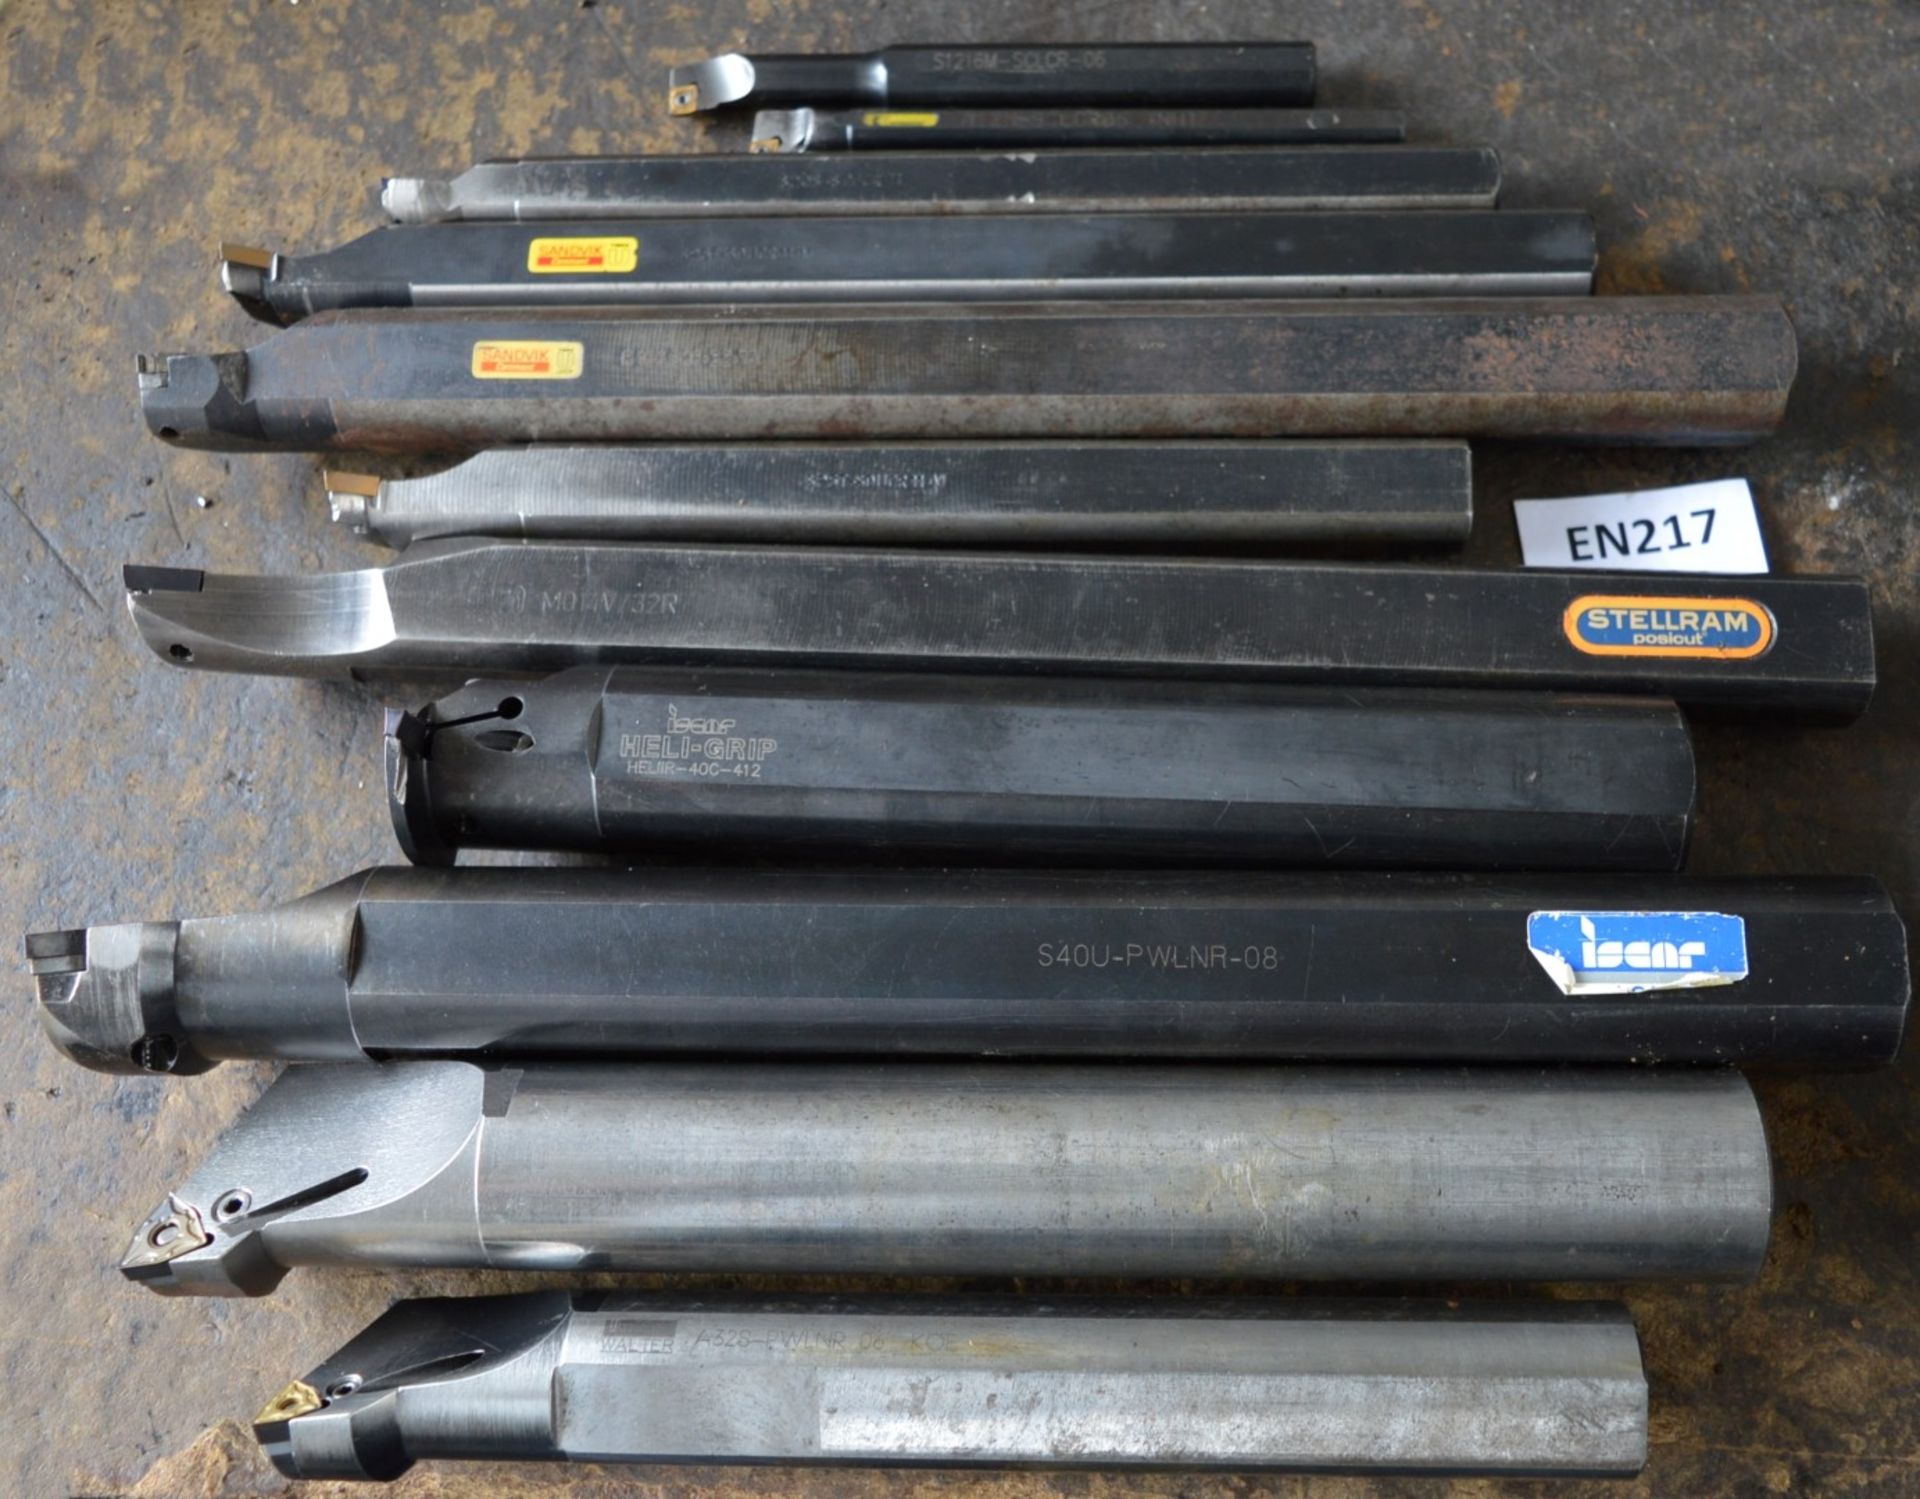 11 x Various Lathe Cutting Tools / Carbide Holders - CL225 - Ref EN217 - Location: Worcester WR14